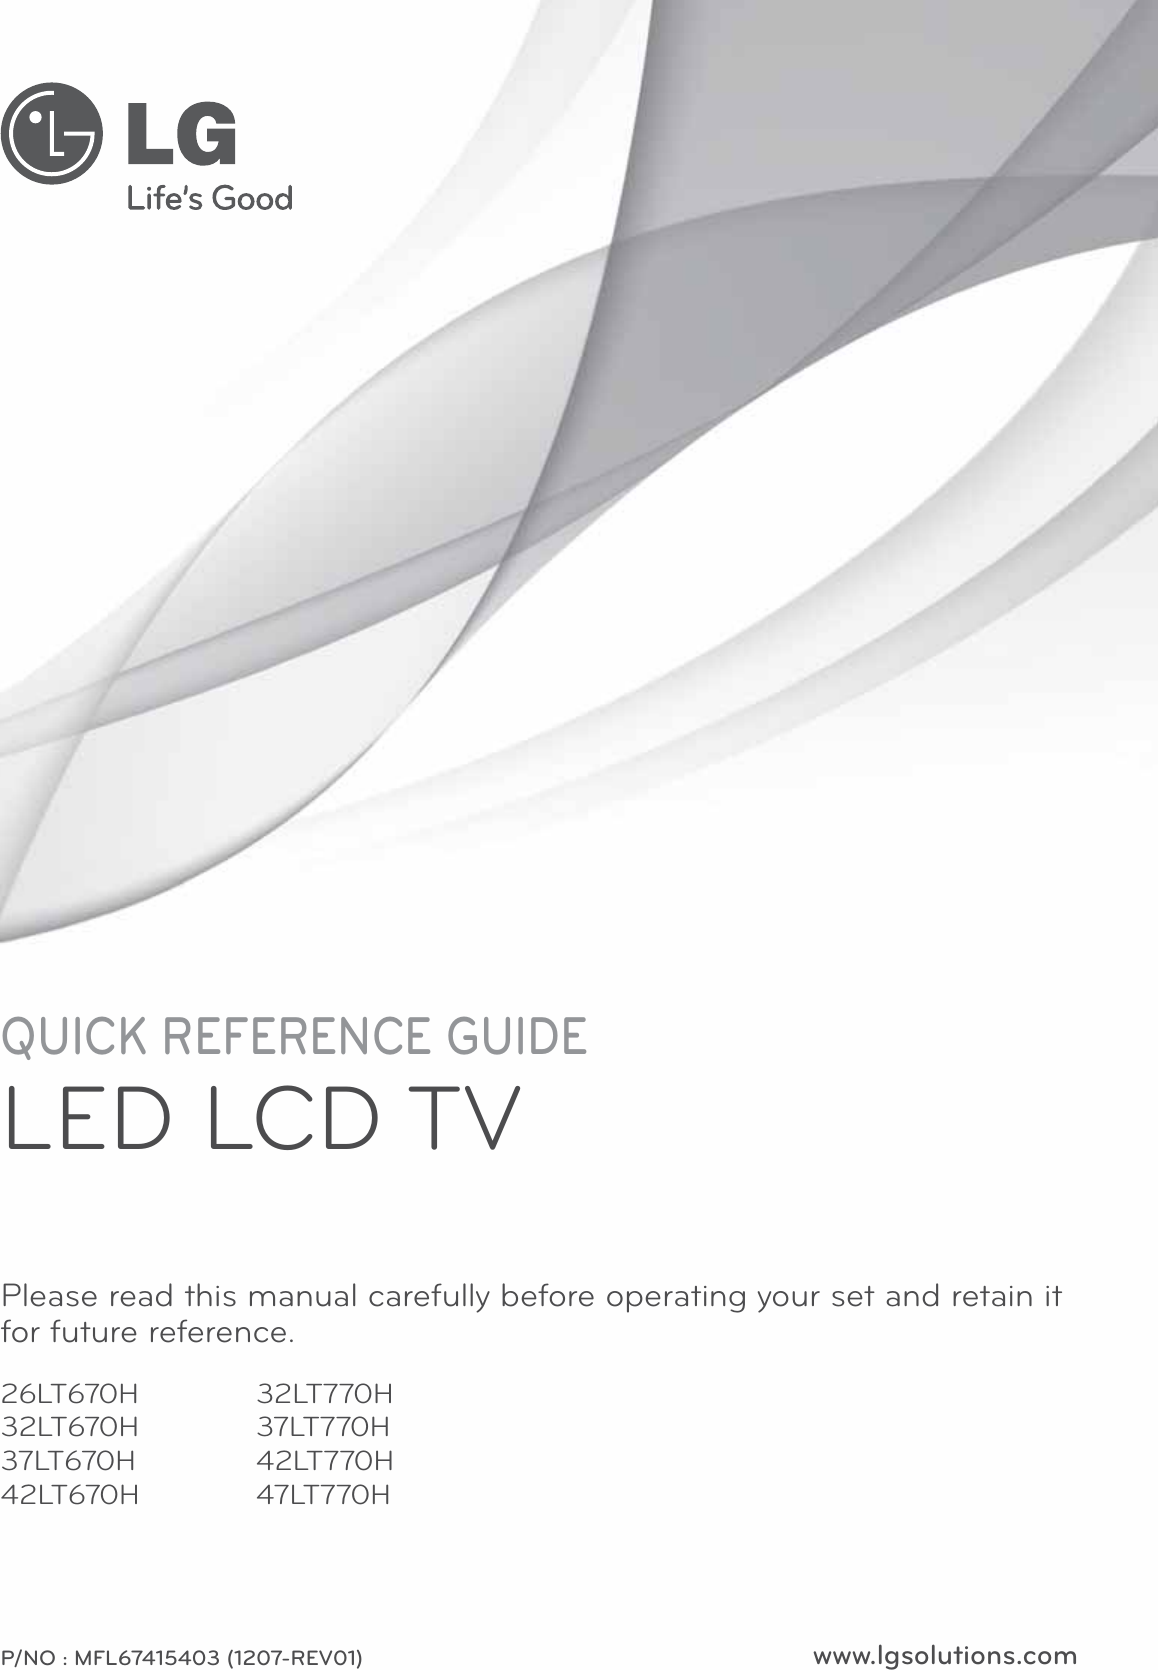 www.lgsolutions.comQUICK REFERENCE GUIDELED LCD TVPlease read this manual carefully before operating your set and retain it for future reference.P/NO : MFL67415403 (1207-REV01)26LT670H32LT670H37LT670H42LT670H32LT770H37LT770H42LT770H47LT770H